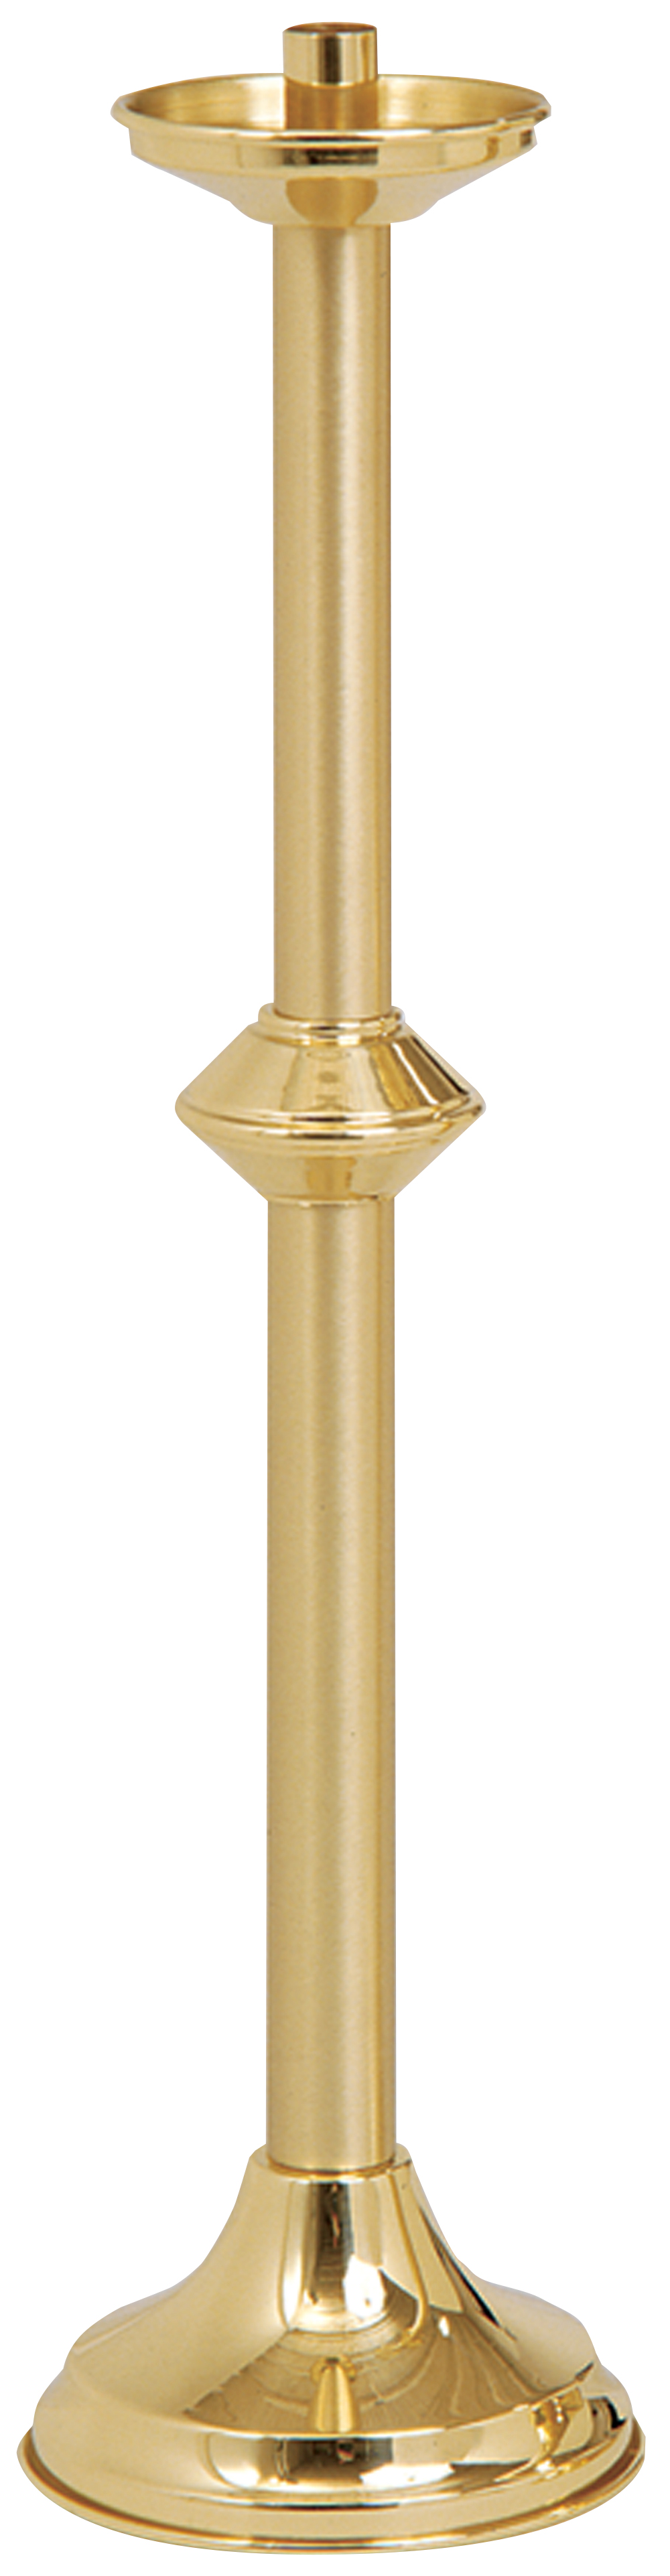 Acolyte Candlestick 24 inch Brass 7/8 inch socket